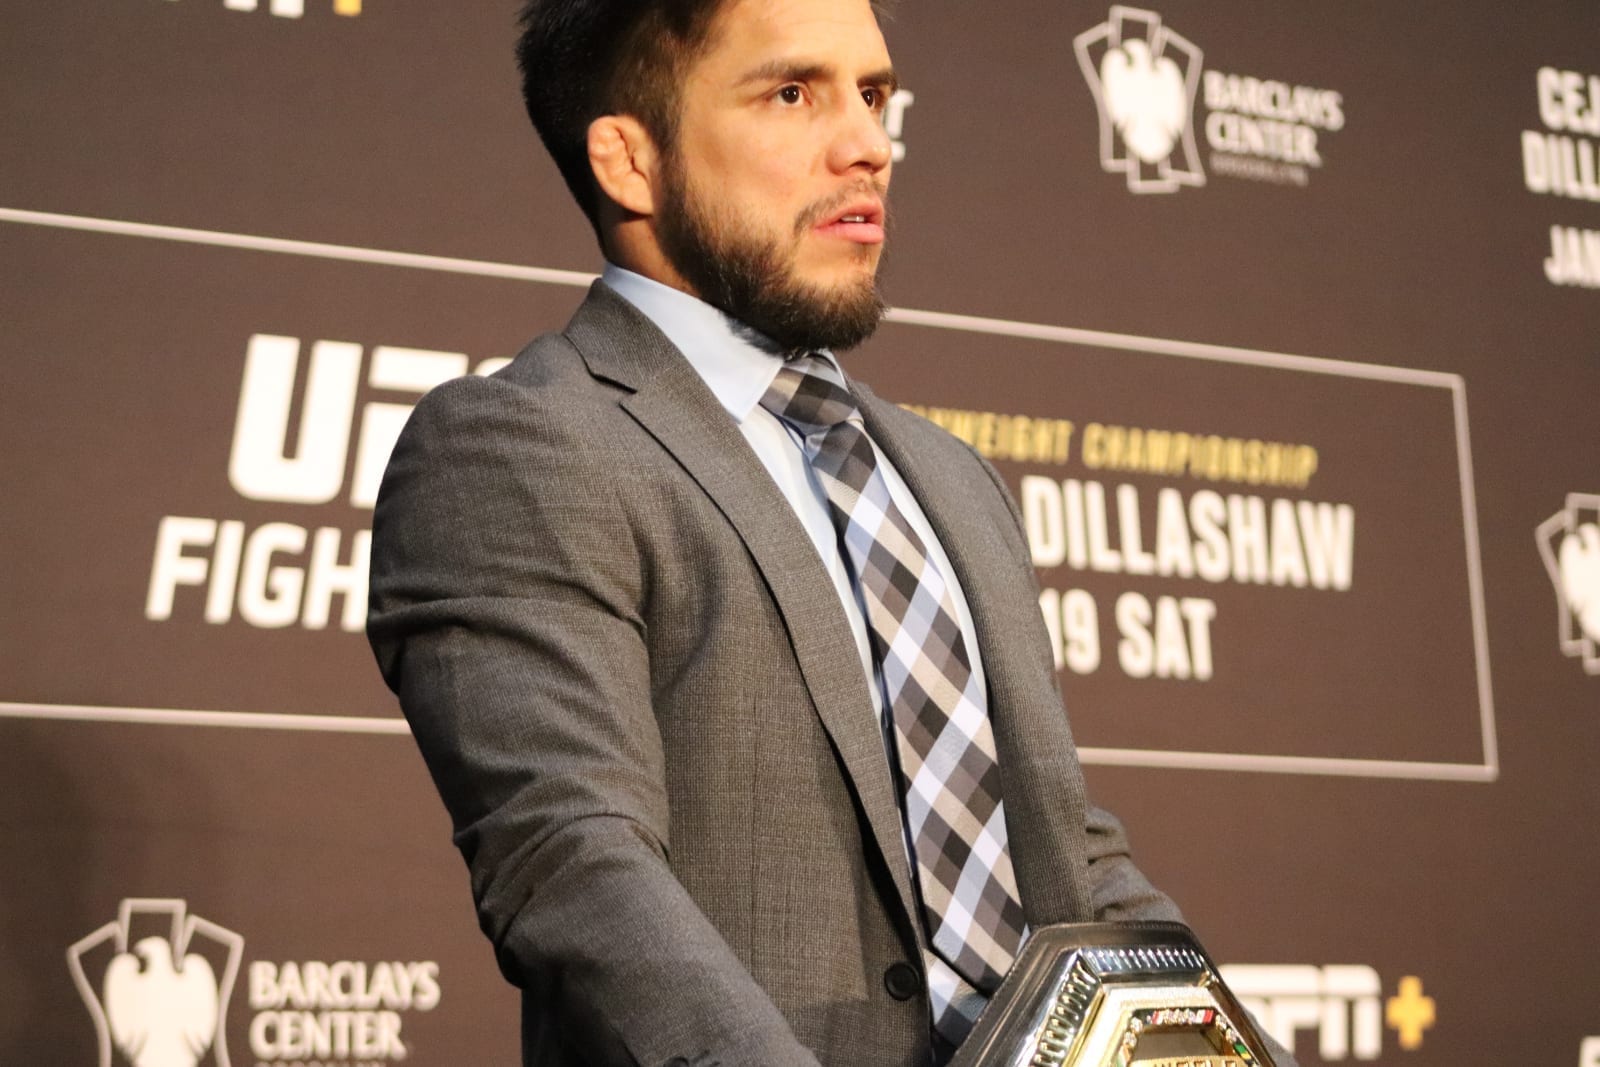 Henry Cejudo on Sean O'Malley: “You can give the pain but can you take the  pain?”